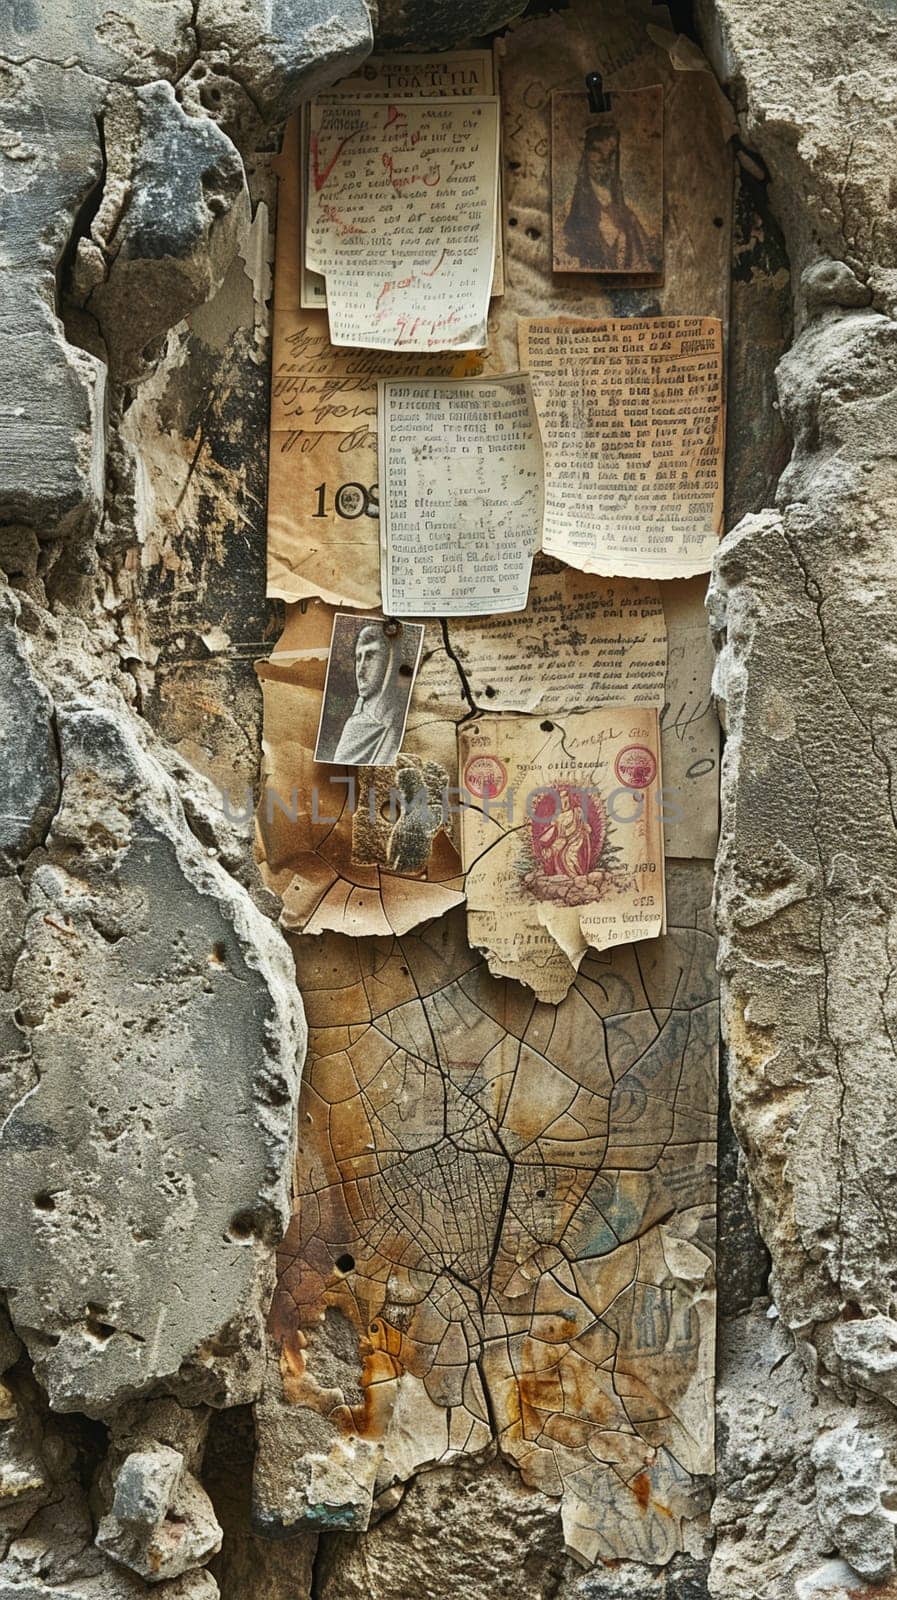 Wailing Wall Notes Tucked into Cracks with Hope and Prayers, The papers blur into ancient stones, personal pleas to the divine.